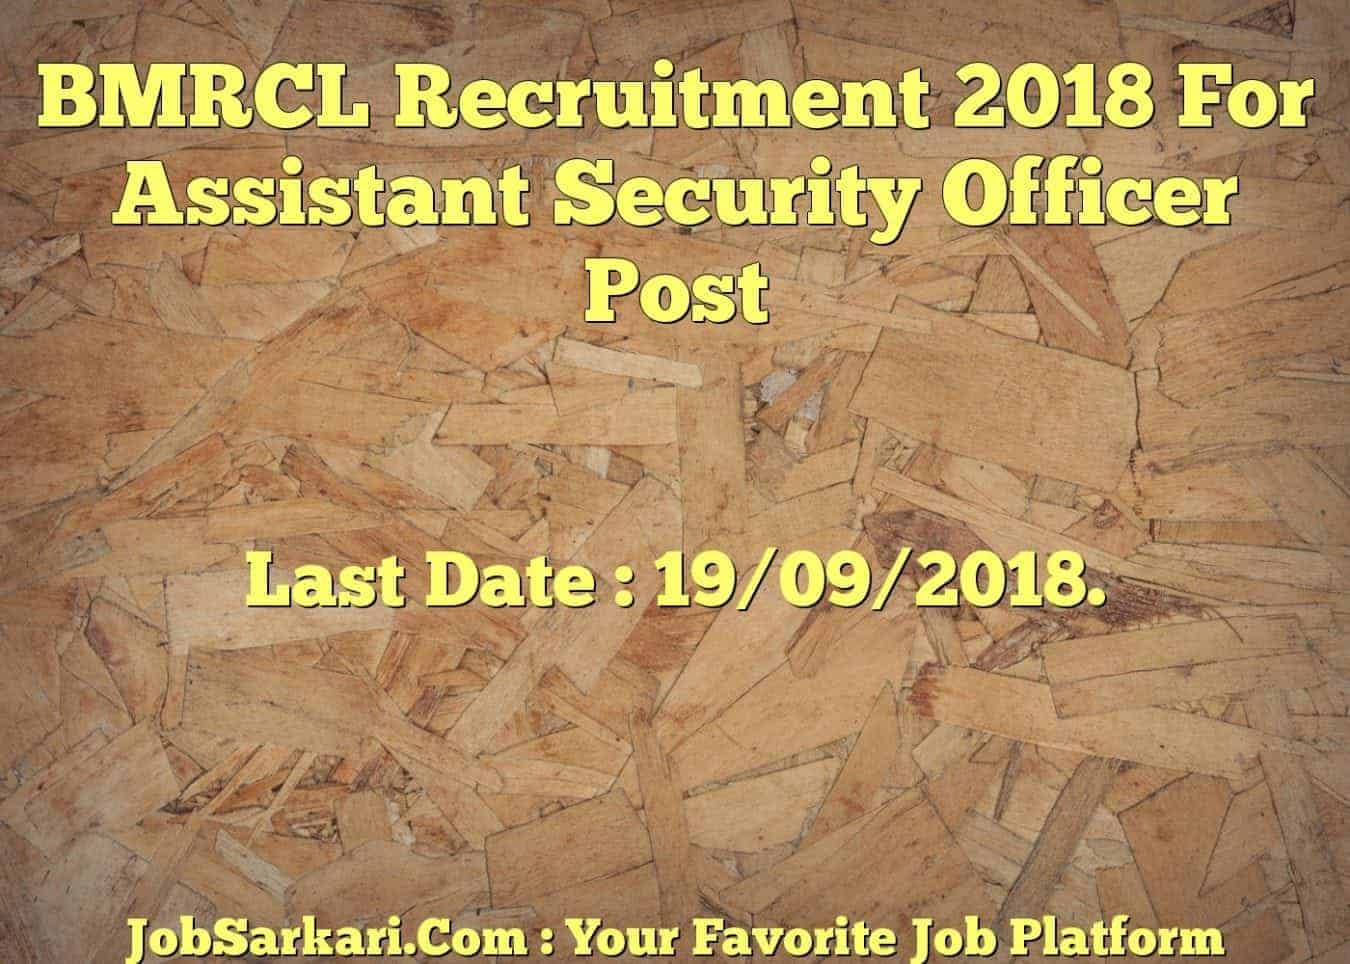 BMRCL Recruitment 2018 For Assistant Security Officer Post